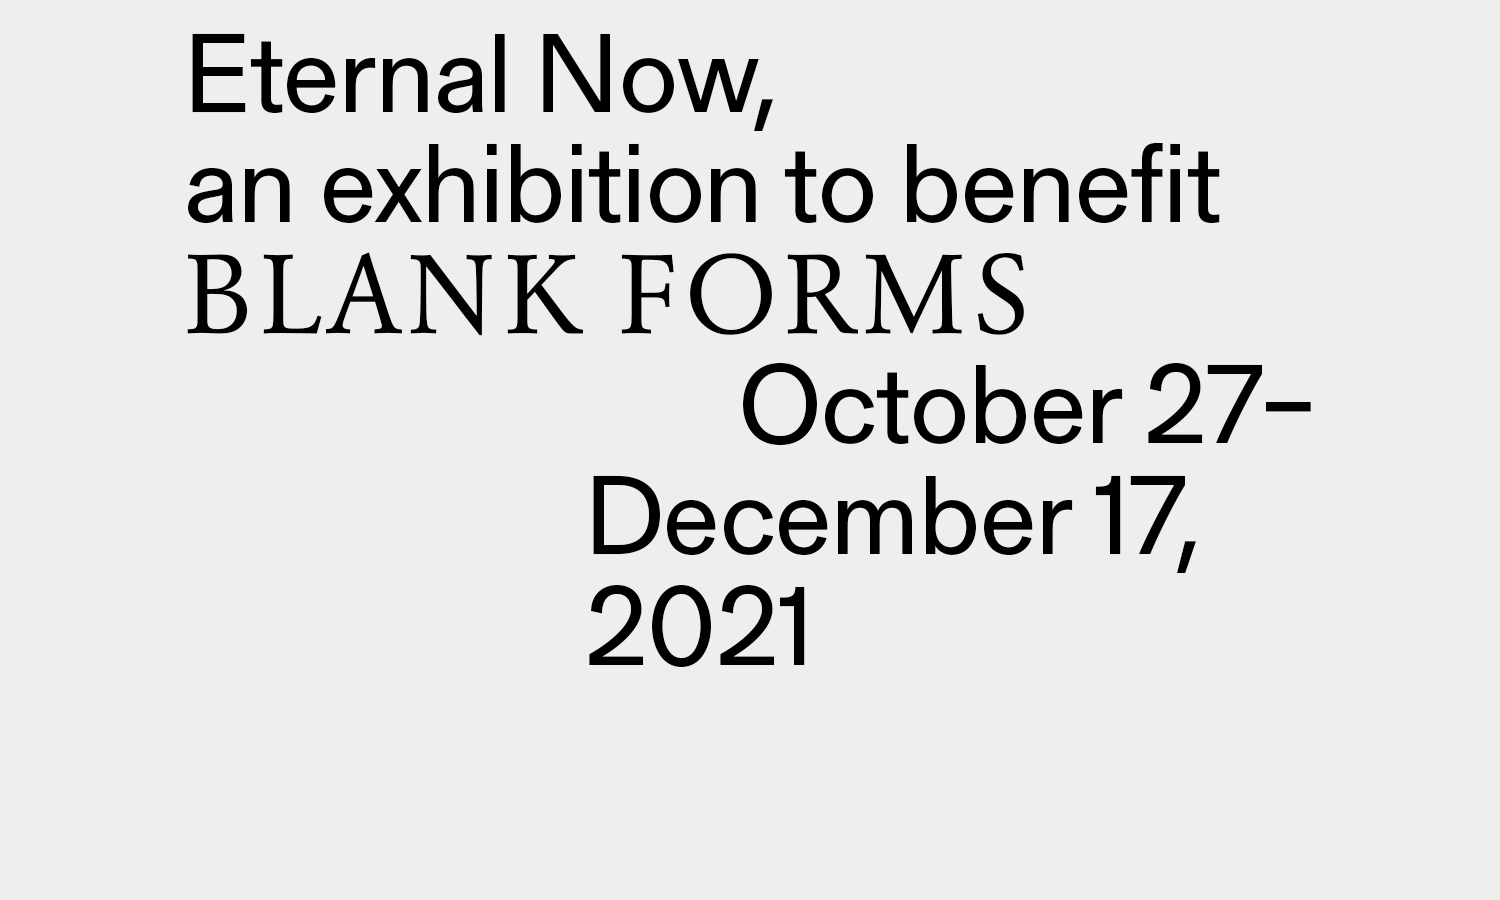 Eternal Now: An Exhibition to benefit Blank Forms October 27-December 17 2021